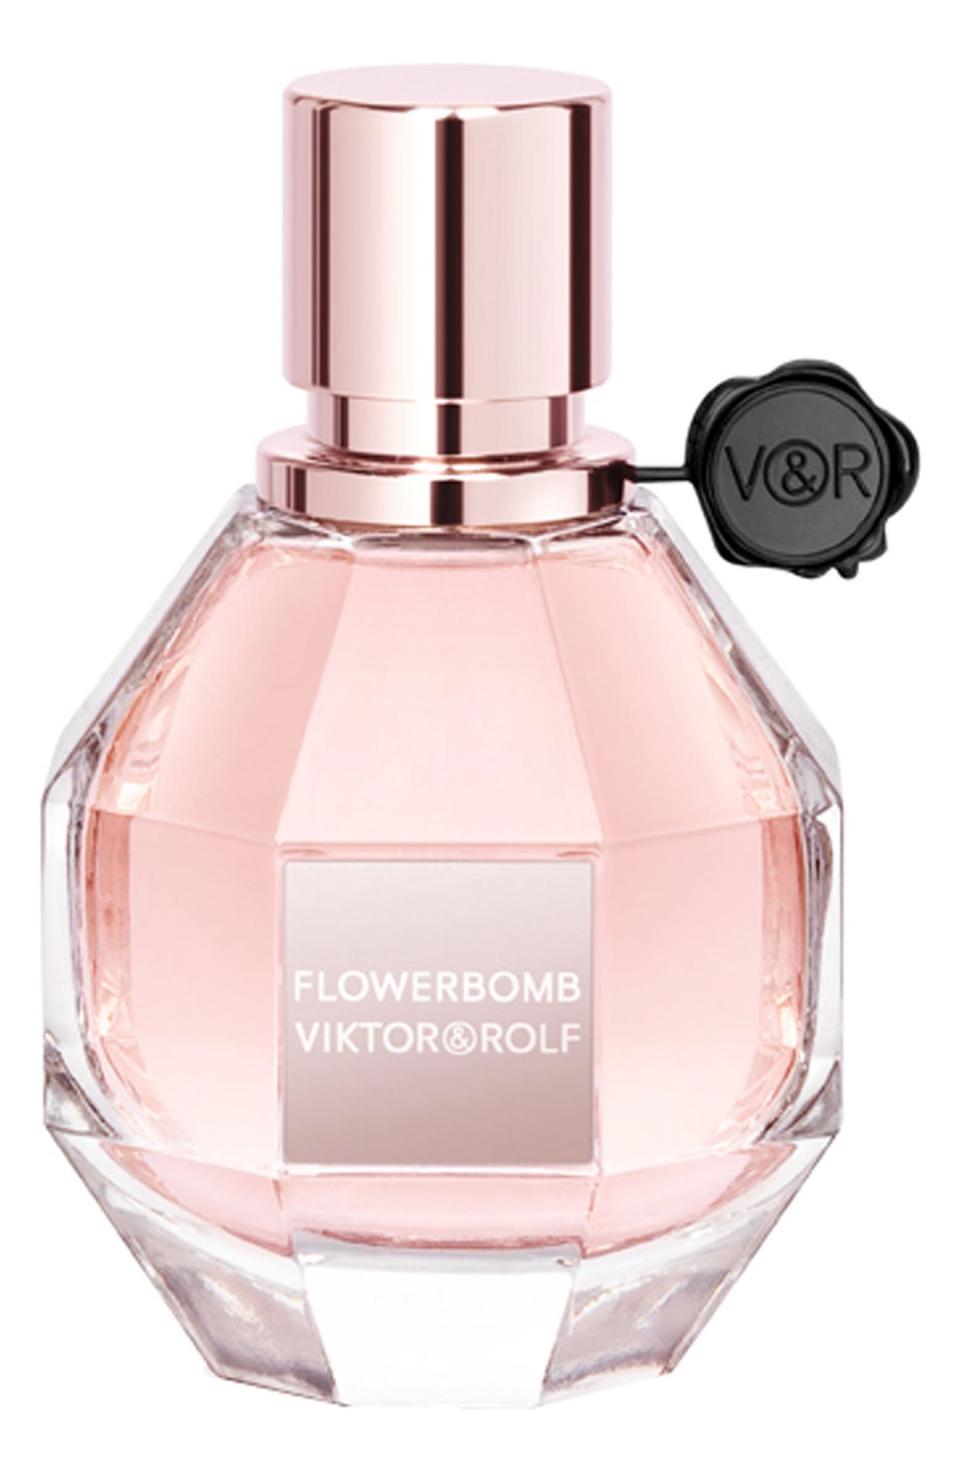 Flowerbomb Eau de Parfum Fragrance Spray is on sale at Nordstrom during the Beauty and Fragrance sale, from $55. 